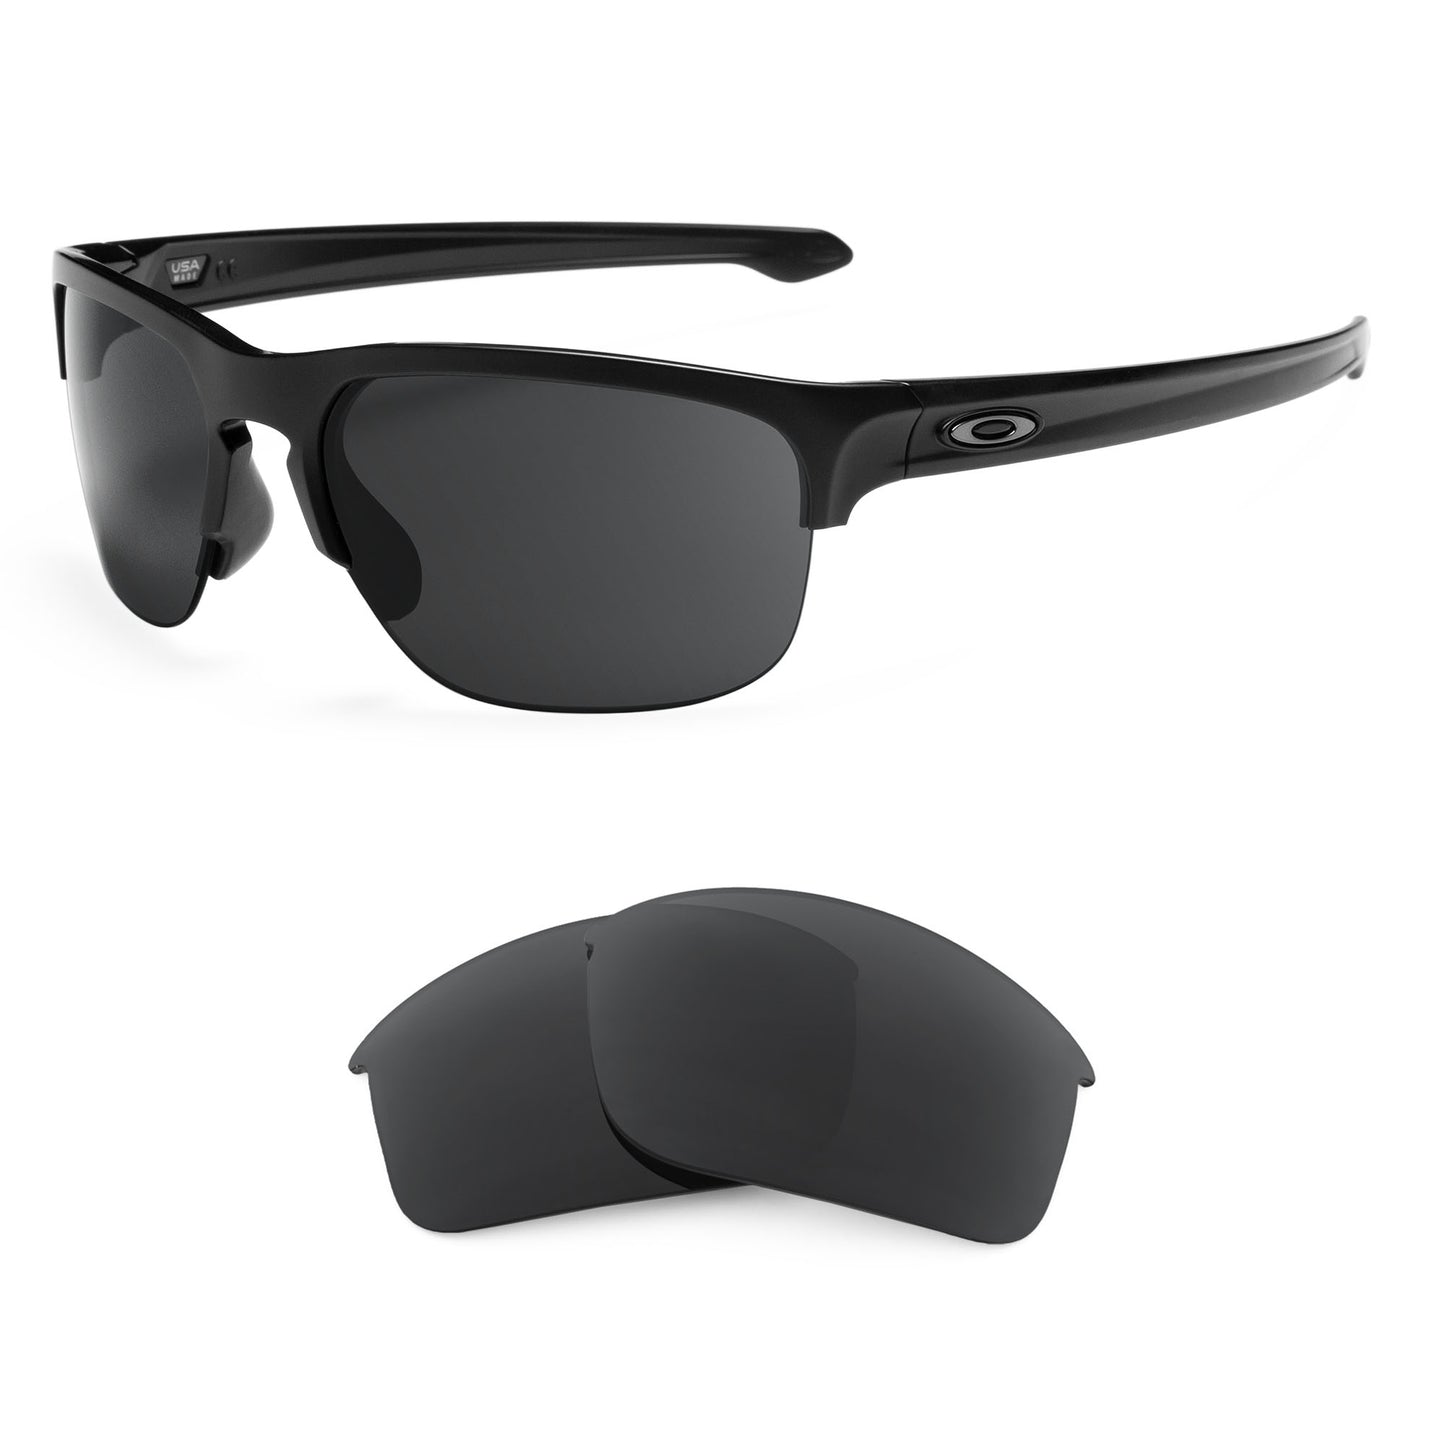 Oakley Sliver Edge sunglasses with replacement lenses